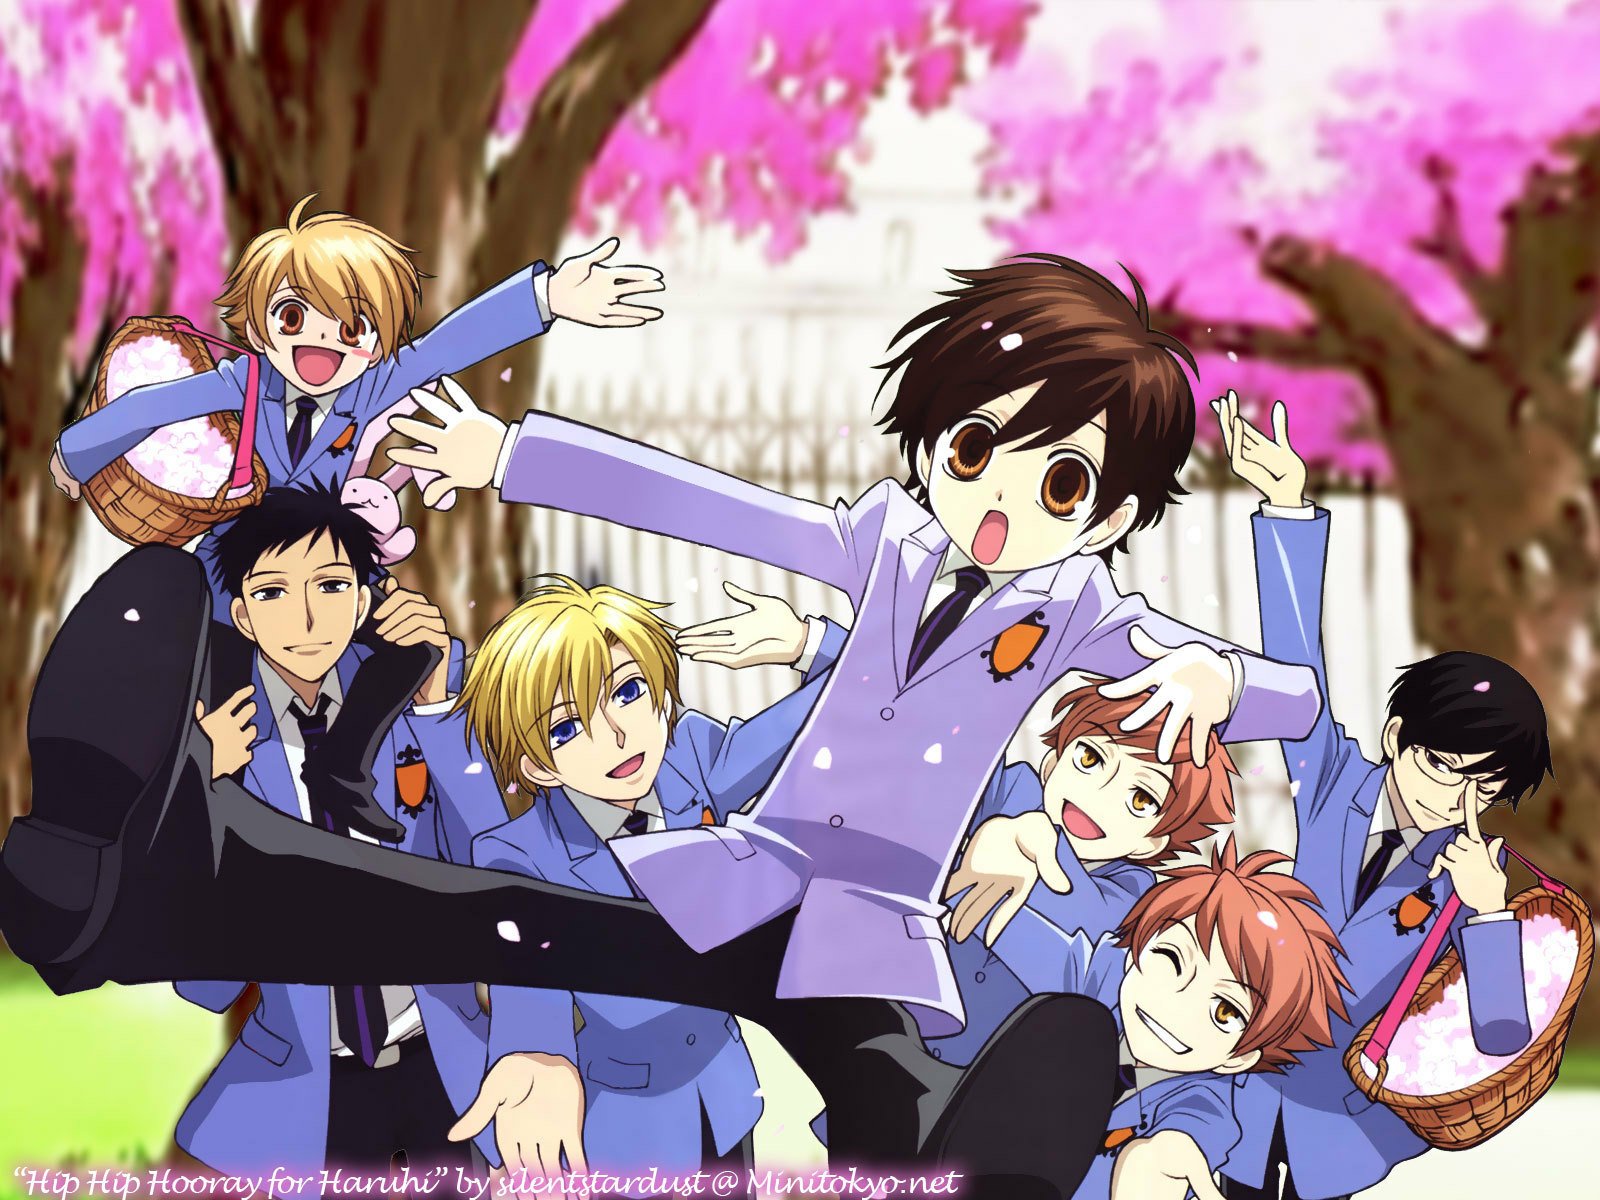 HD wallpaper featuring the characters of Ouran High School Host Club with cherry blossoms in the background.